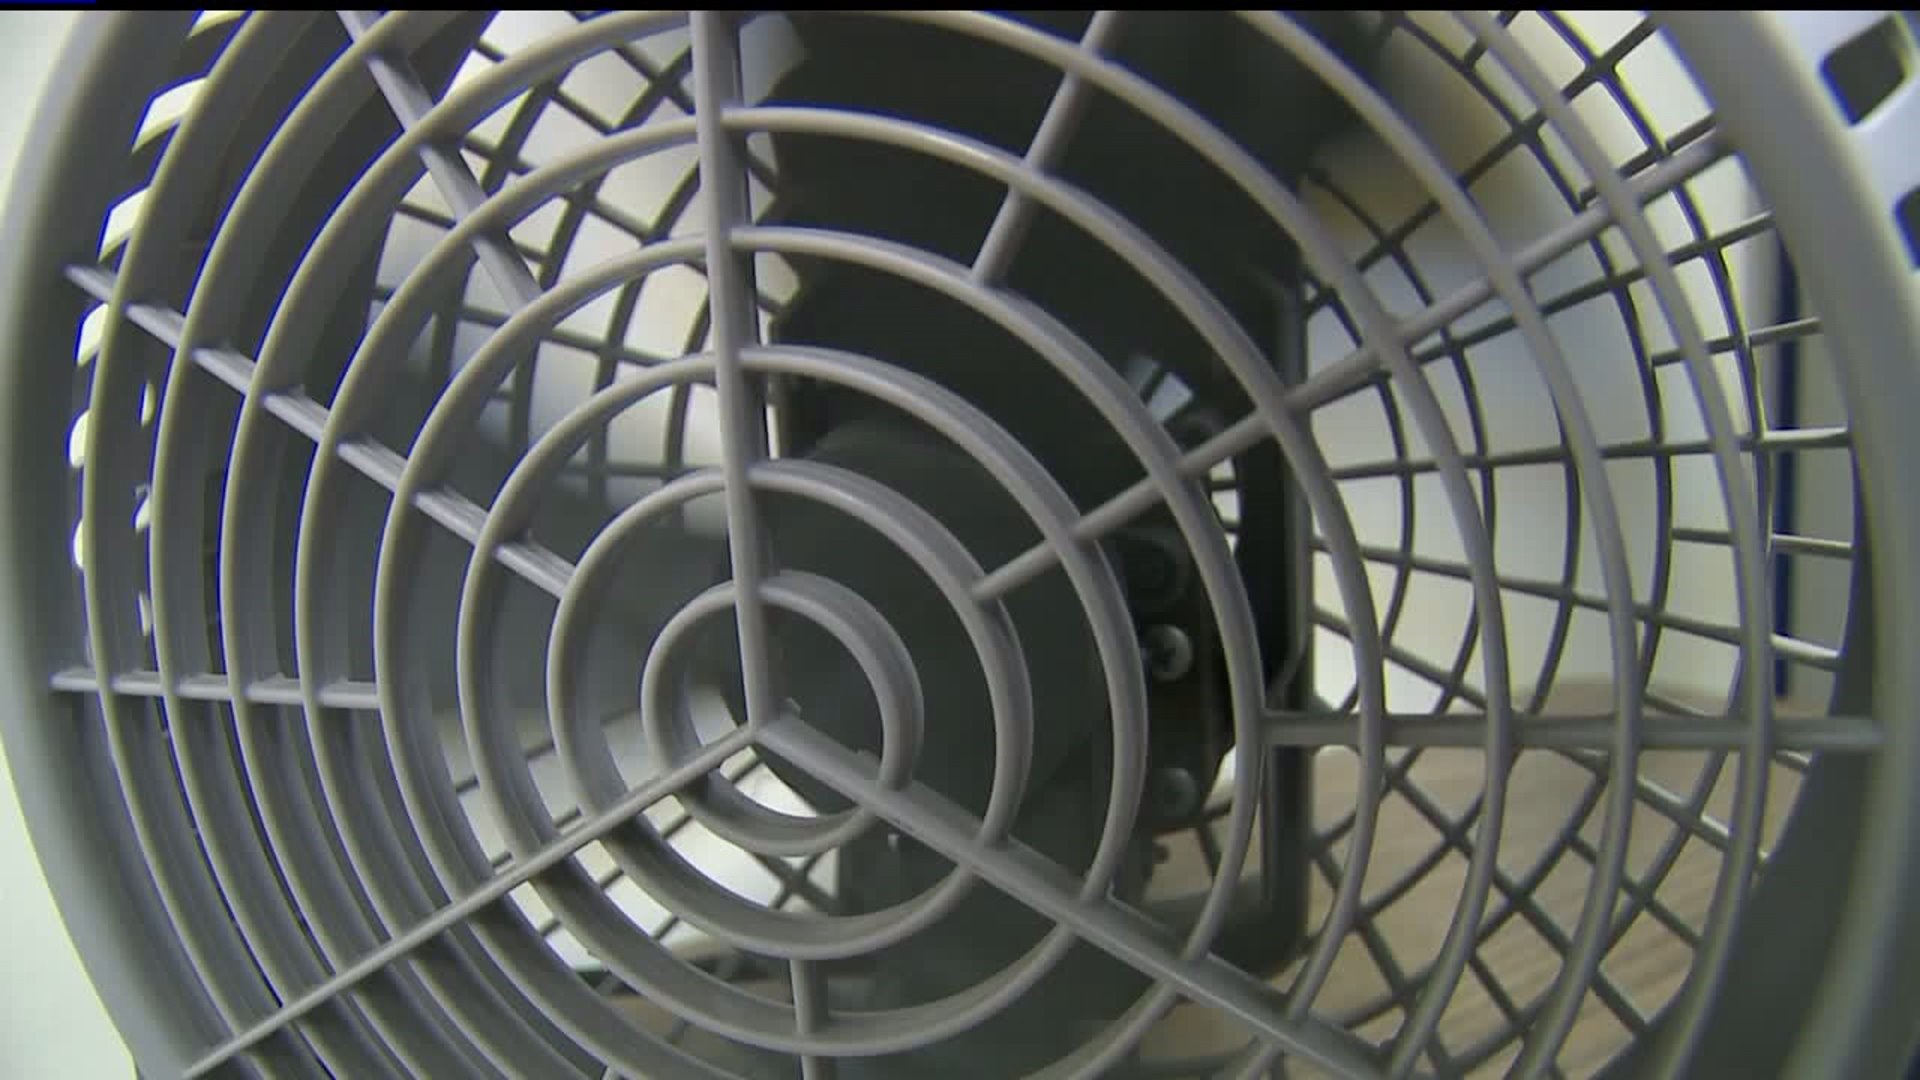 The Pennsylvania Public Utility Commission says the price of electricity could change as the weather gets warmer